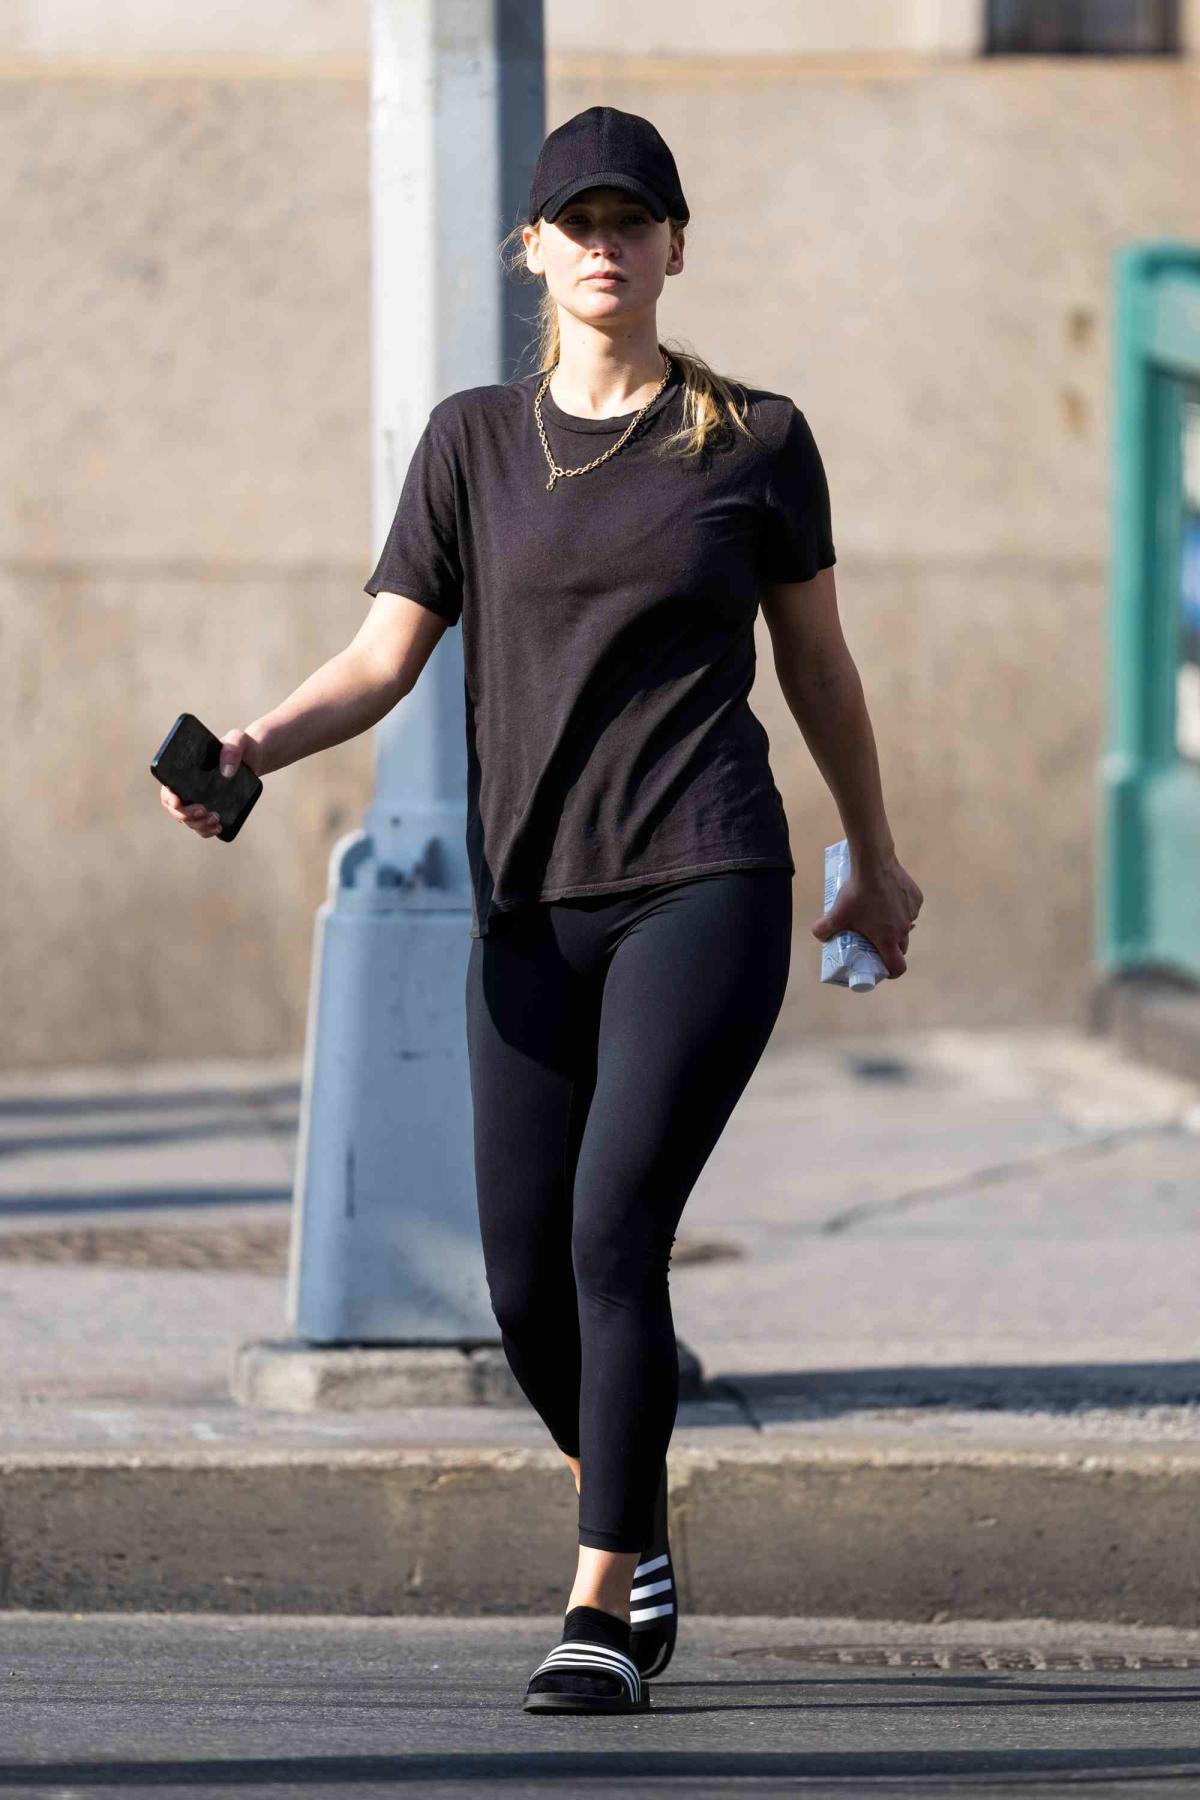 Jennifer Lawrence looks fit in a black tank top and leggings while